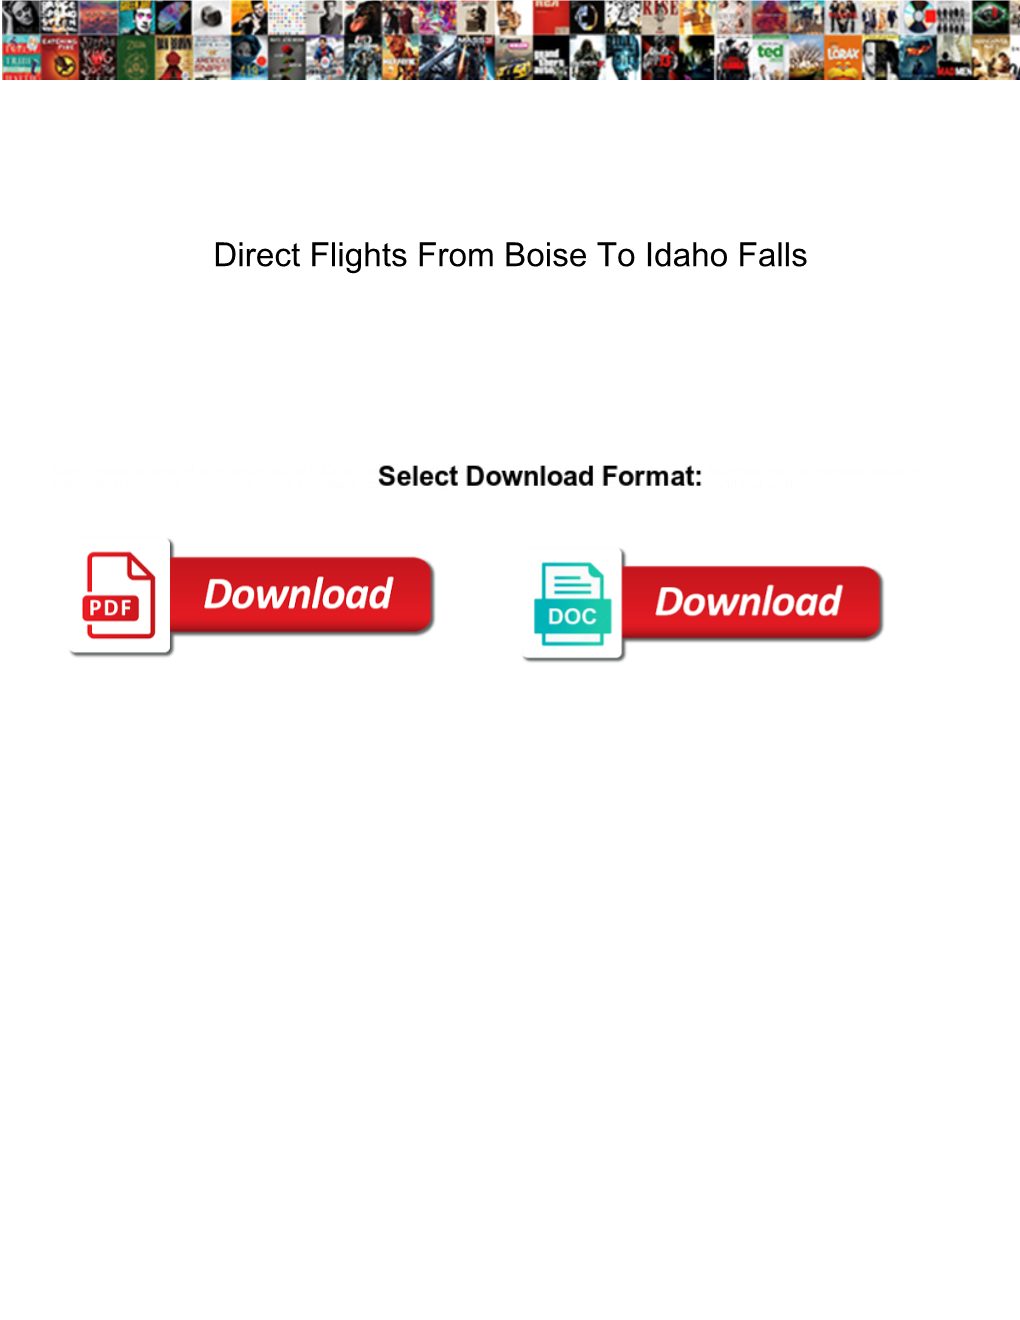 Direct Flights from Boise to Idaho Falls